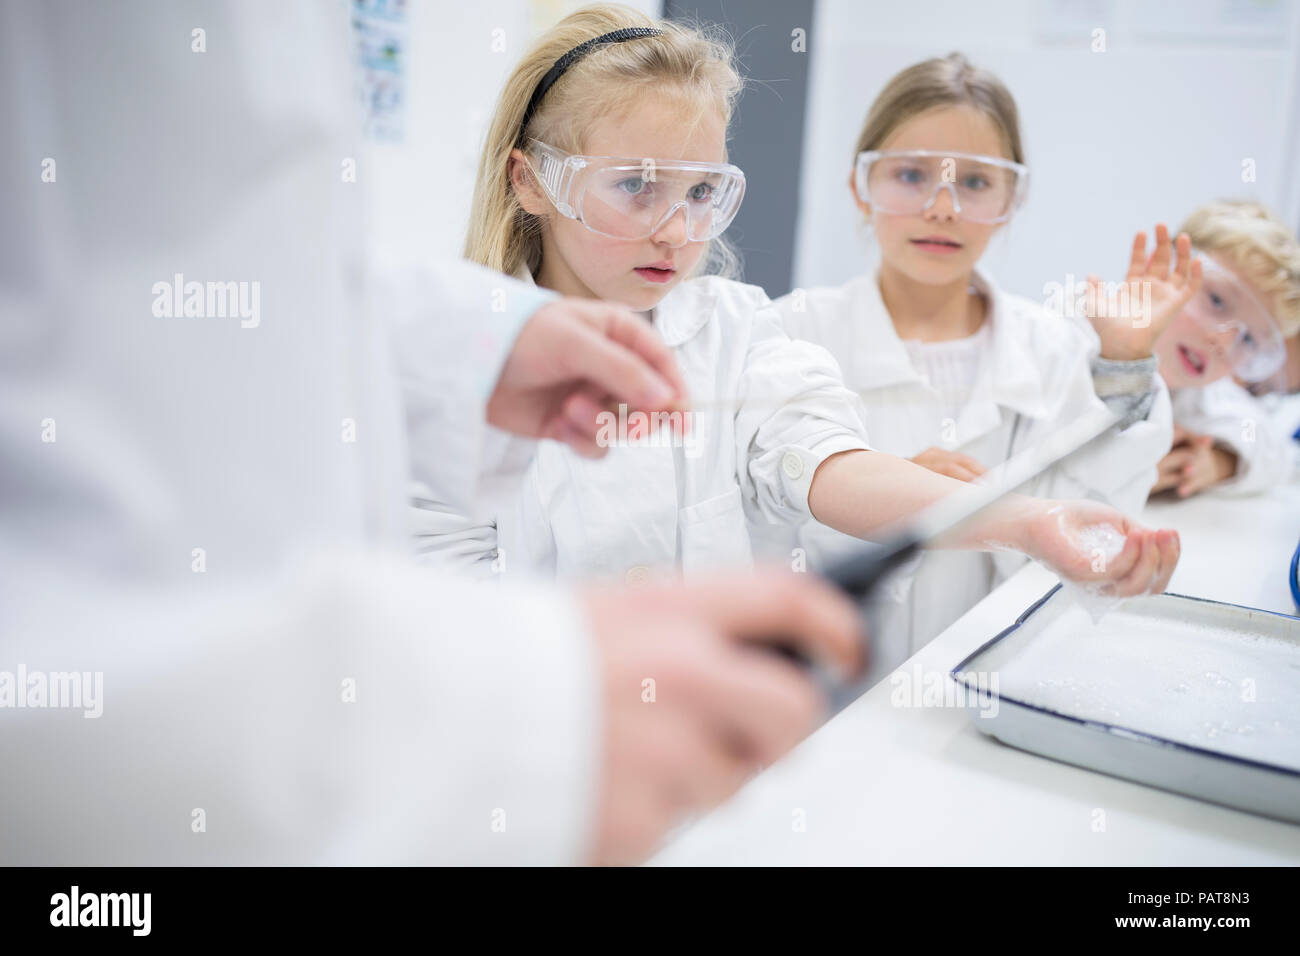 Pupils in science class watching teacher experimenting Stock Photo